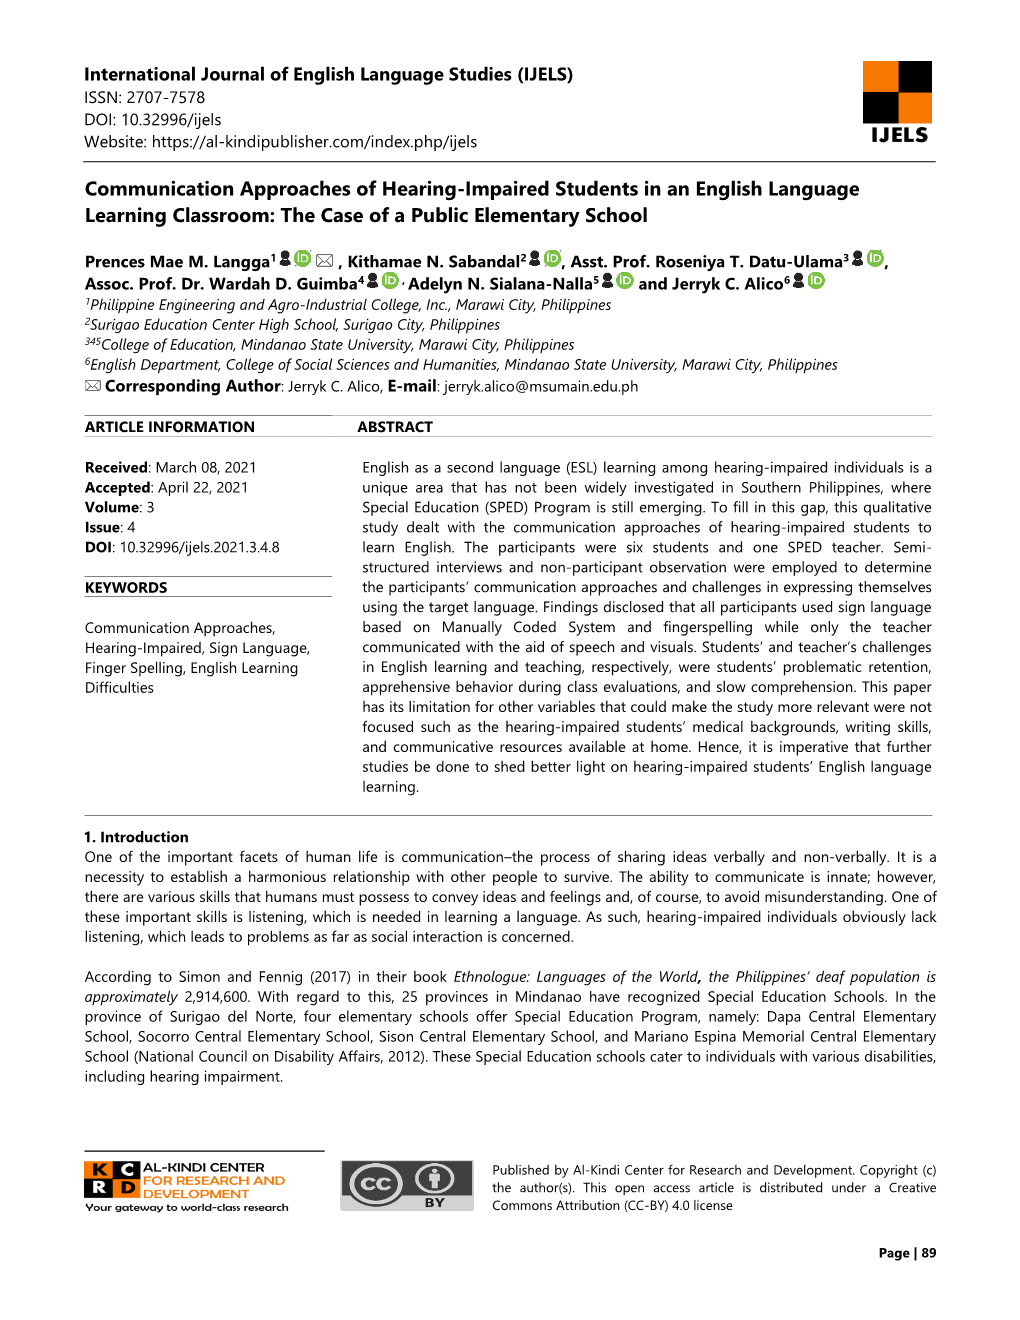 Communication Approaches of Hearing-Impaired Students in an English Language Learning Classroom: the Case of a Public Elementary School